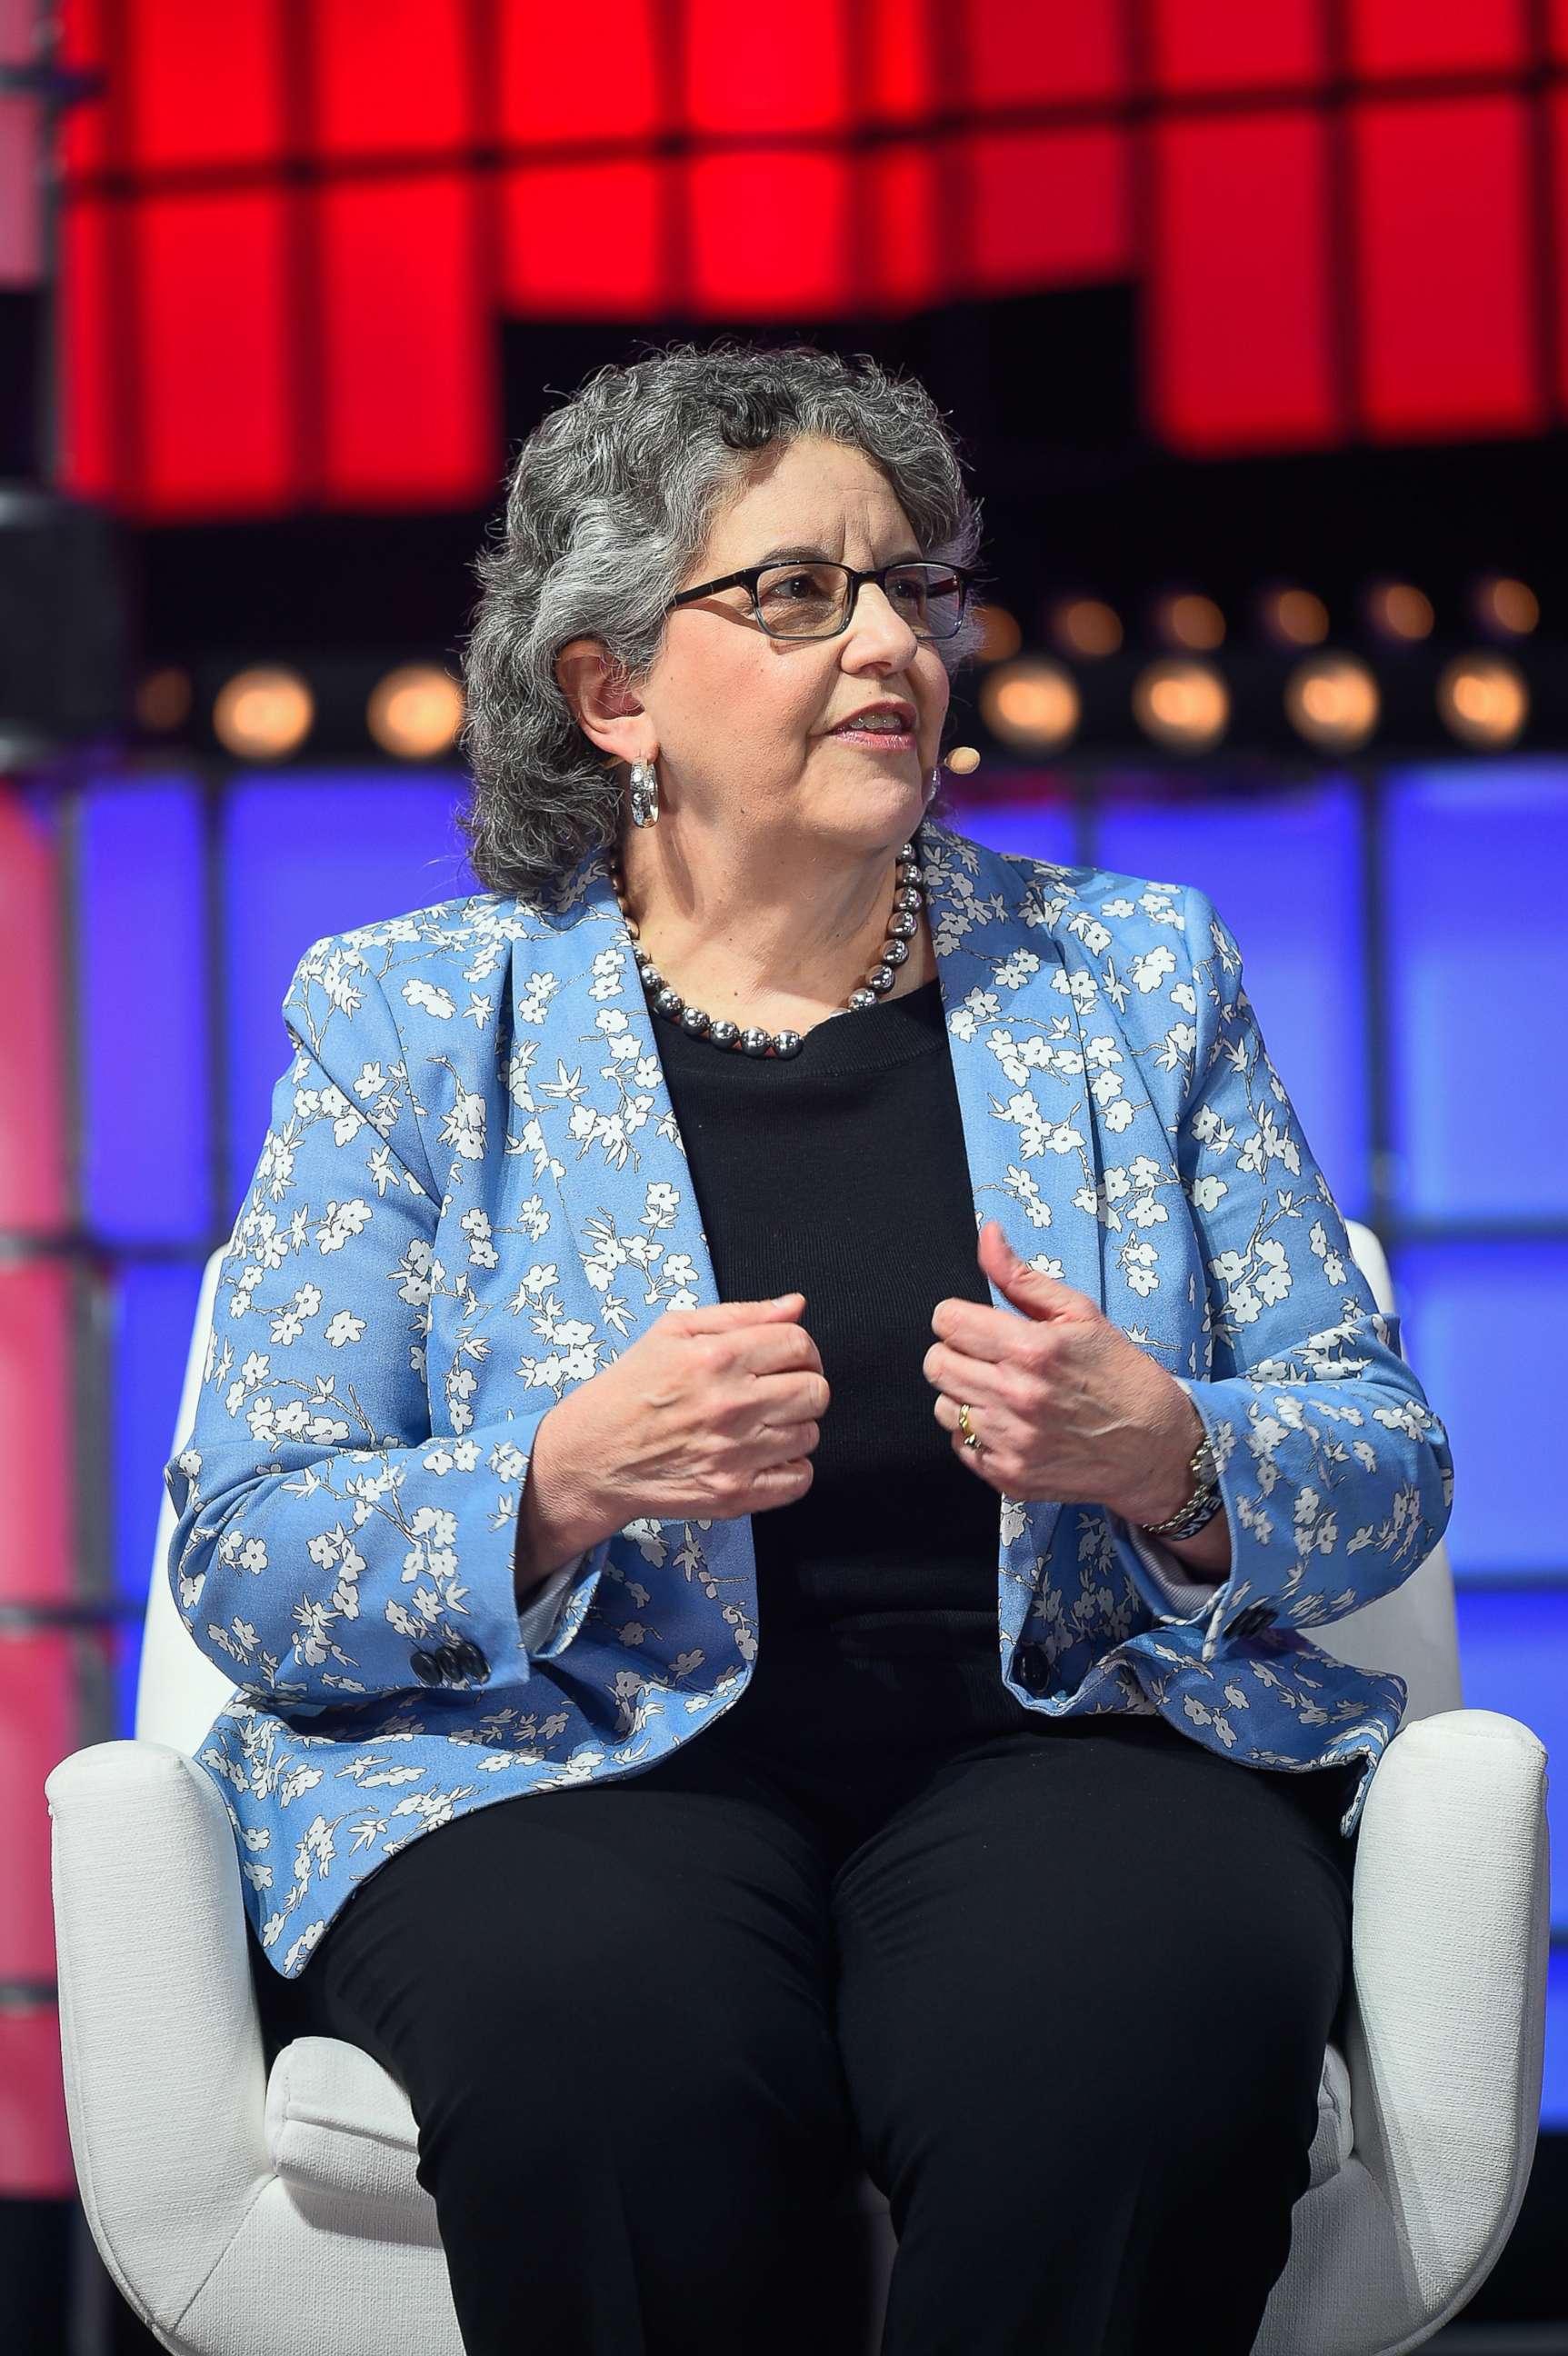 PHOTO: In this Nov. 4, 2021, file photo, Ellen Weintraub, Commissioner at U.S. Federal Election Commission, addresses the audience during the last day of the Web Summit 2021 in Lisbon.